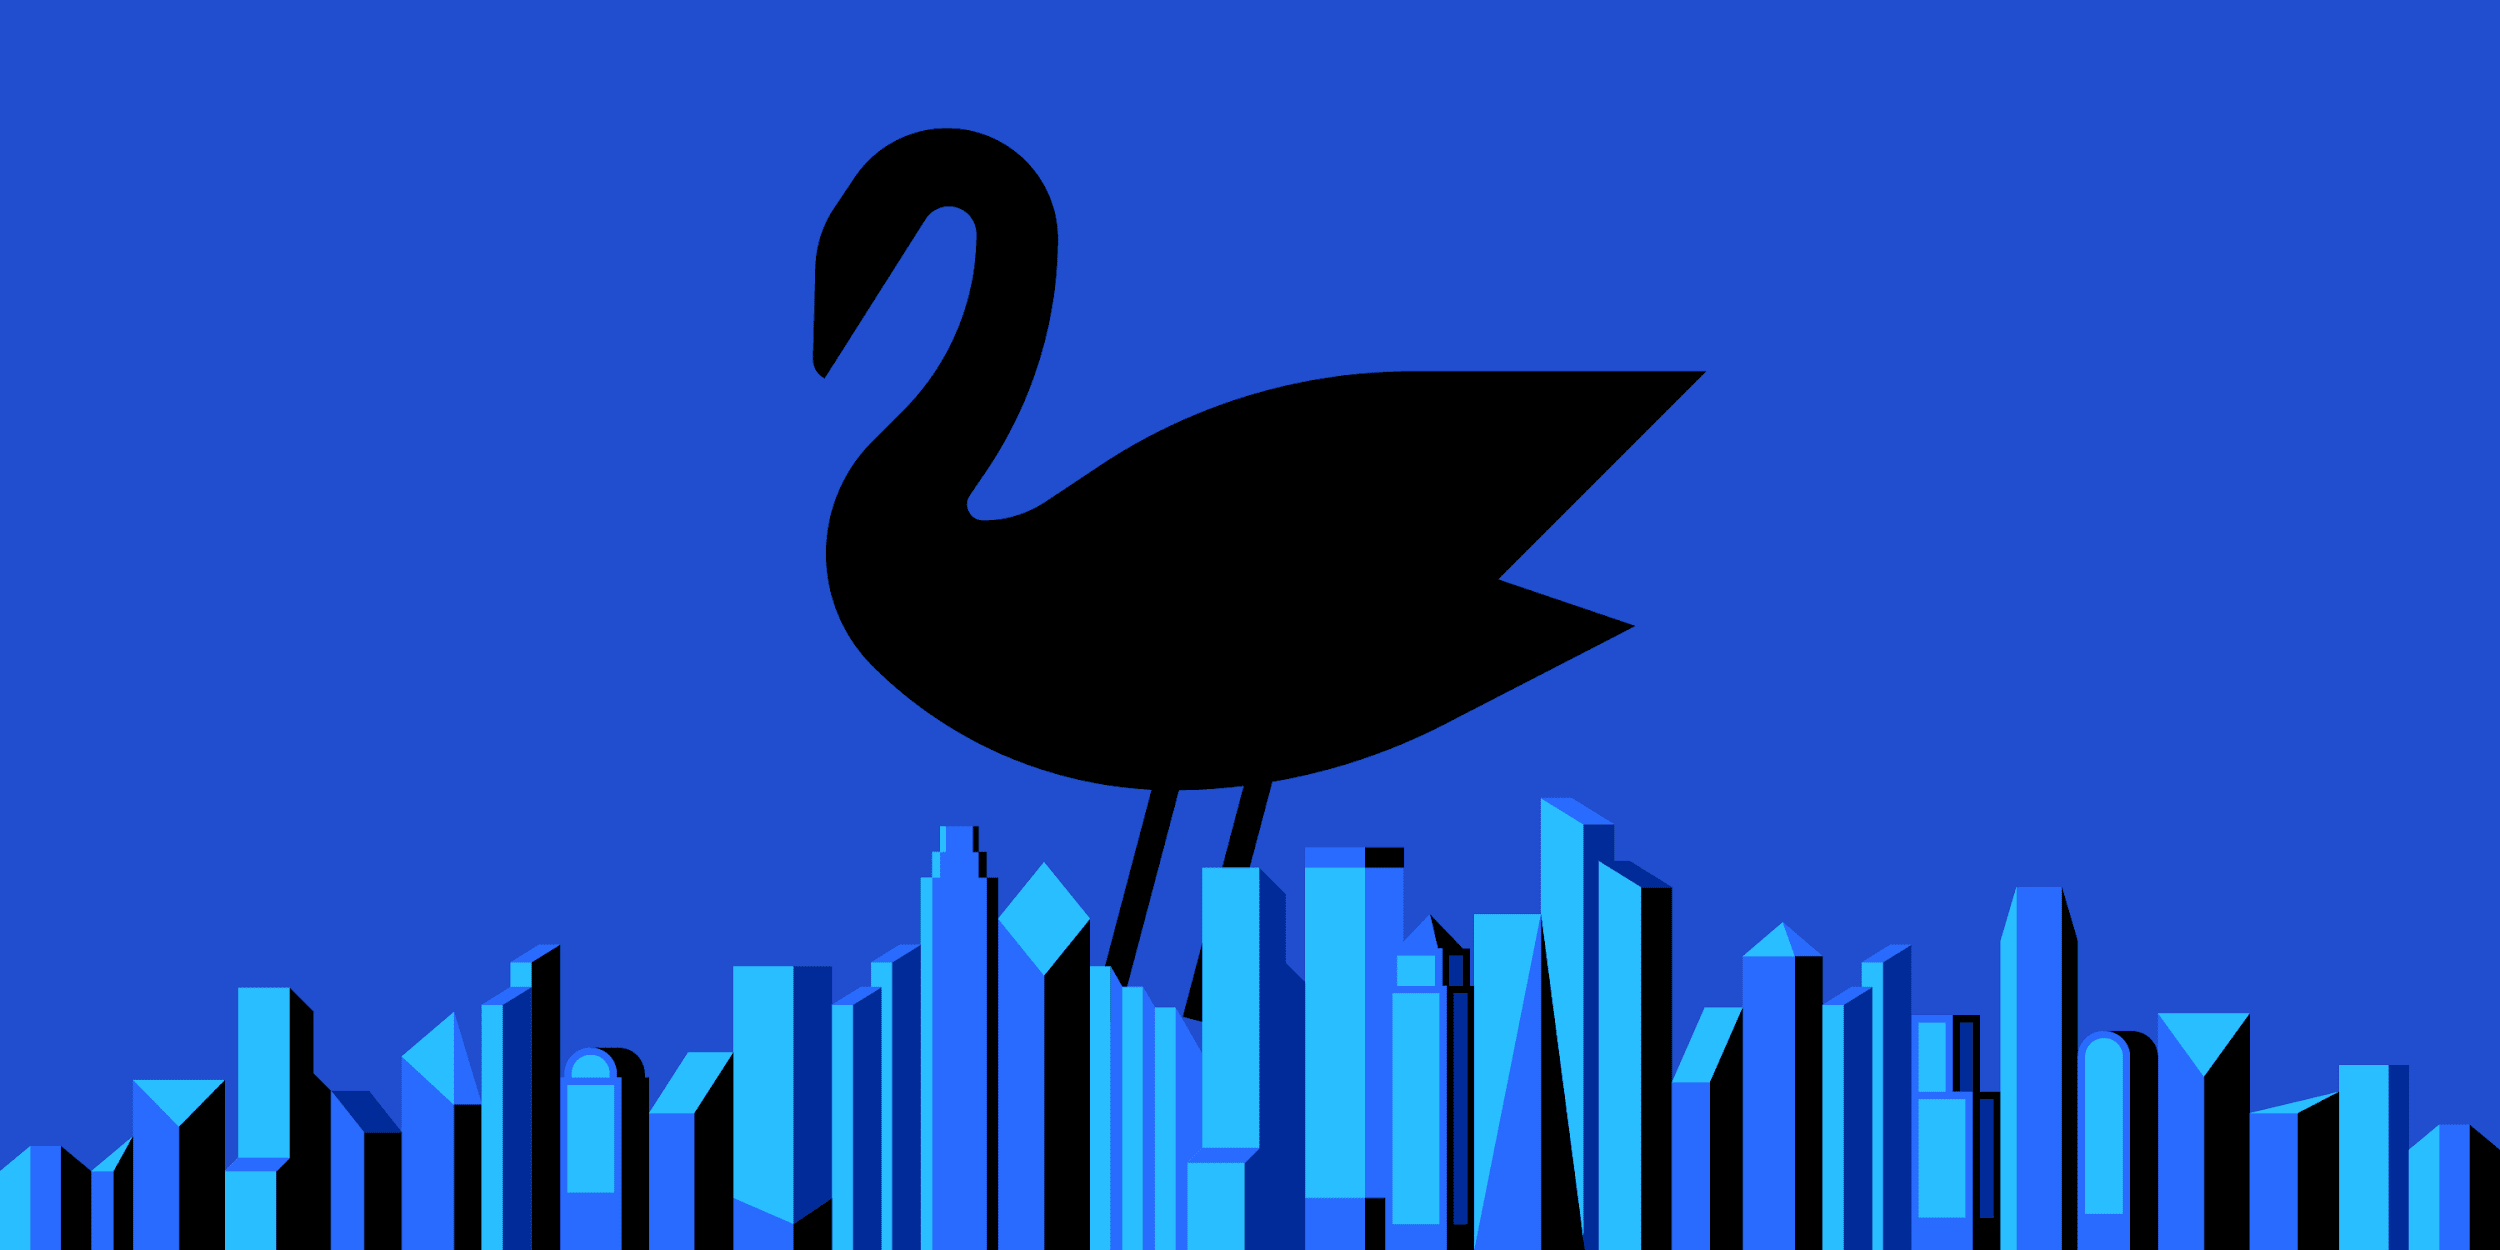 Black Swans and the Paradigm Shift of Remote Work – COVID-19 Lessons, Part 2